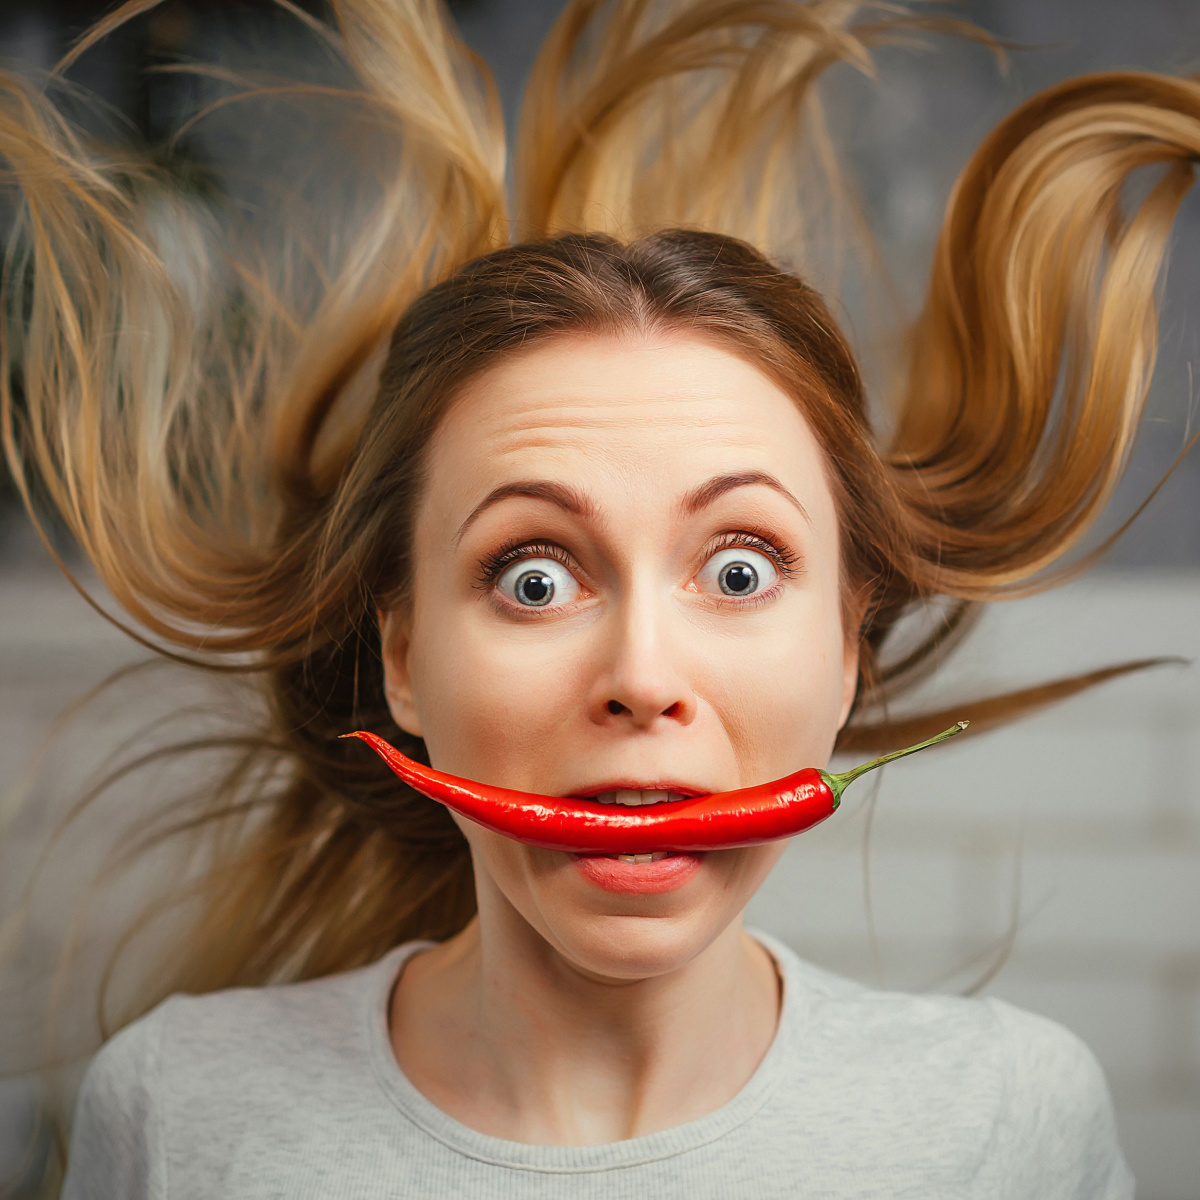 woman with red chili pepper in her mouth